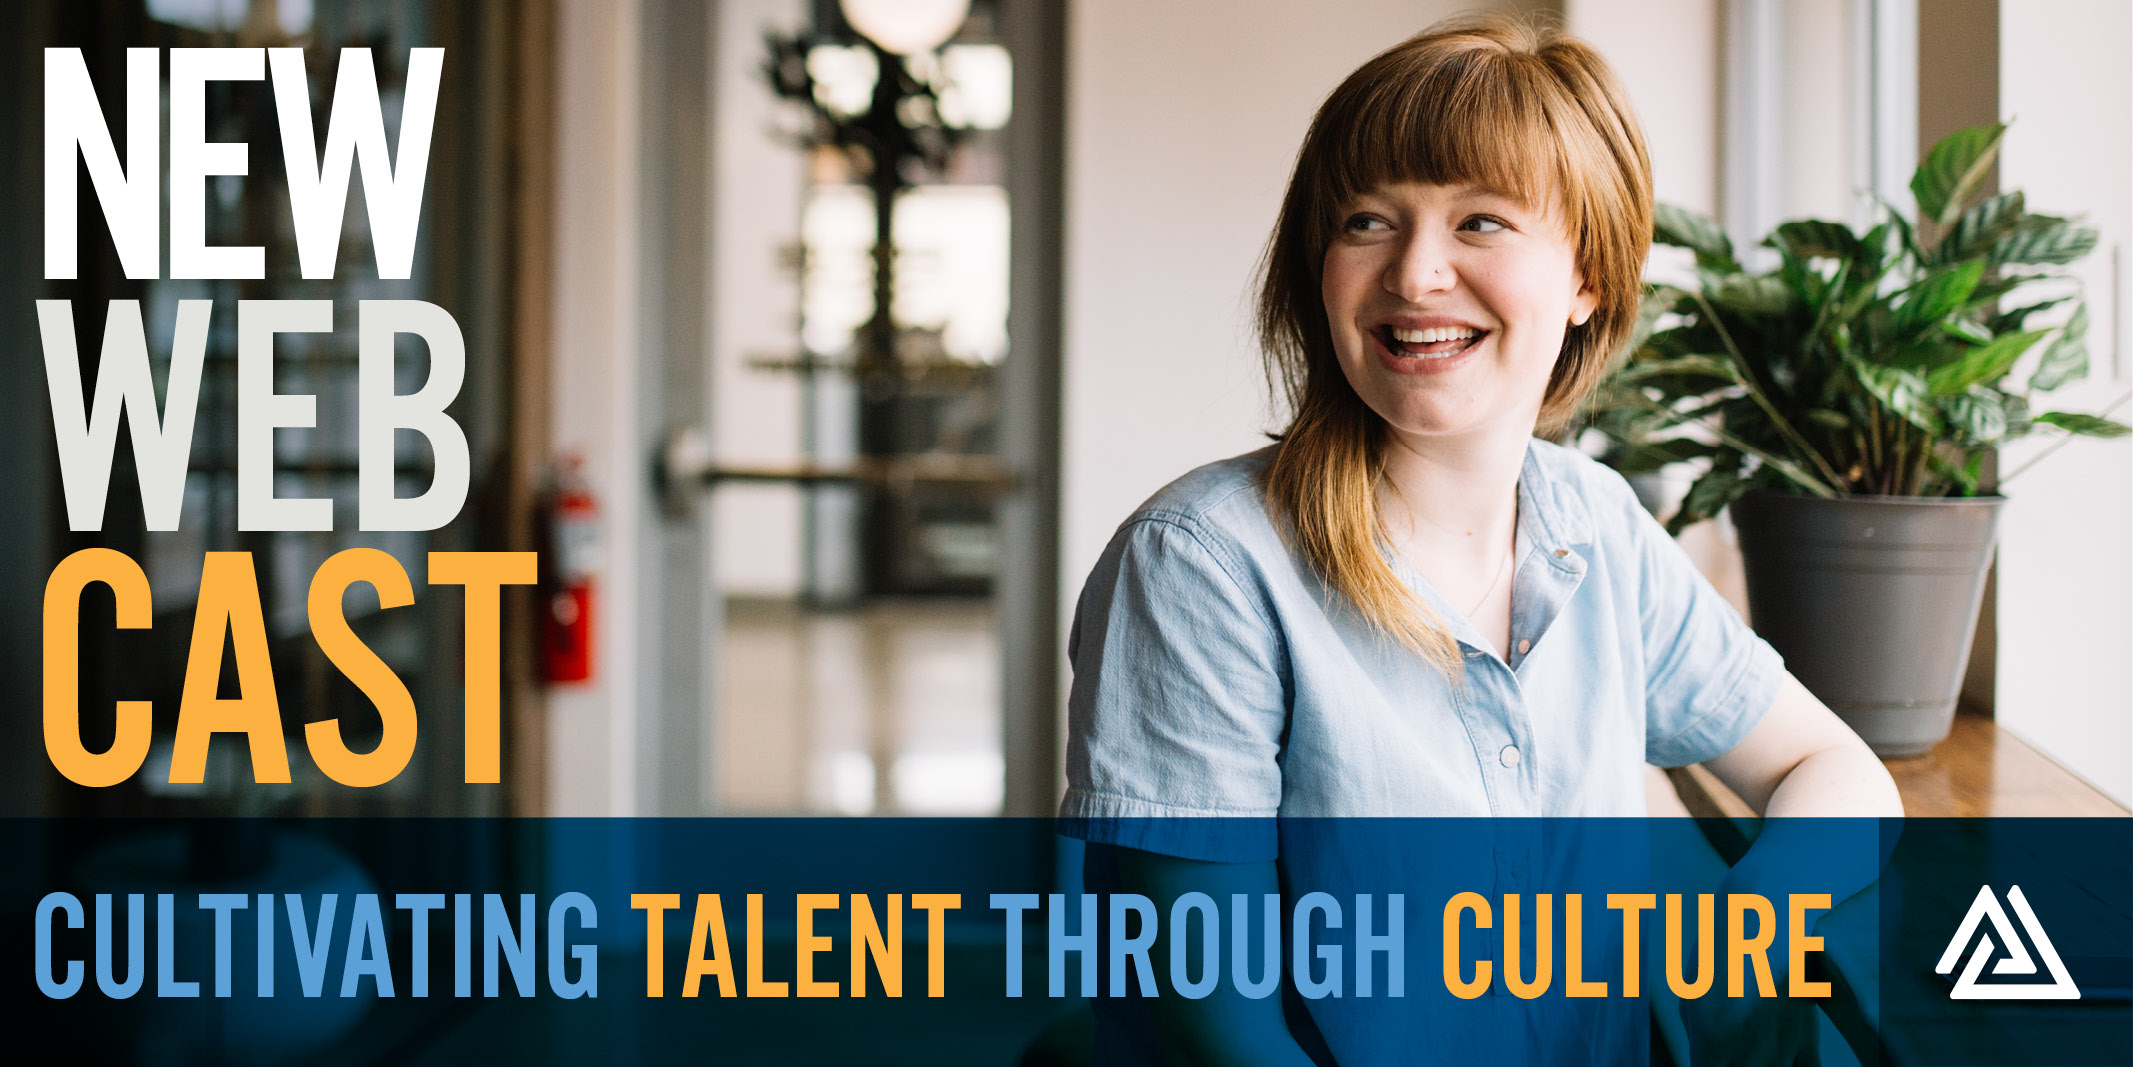 WATCH Cultivating Talent Through Culture